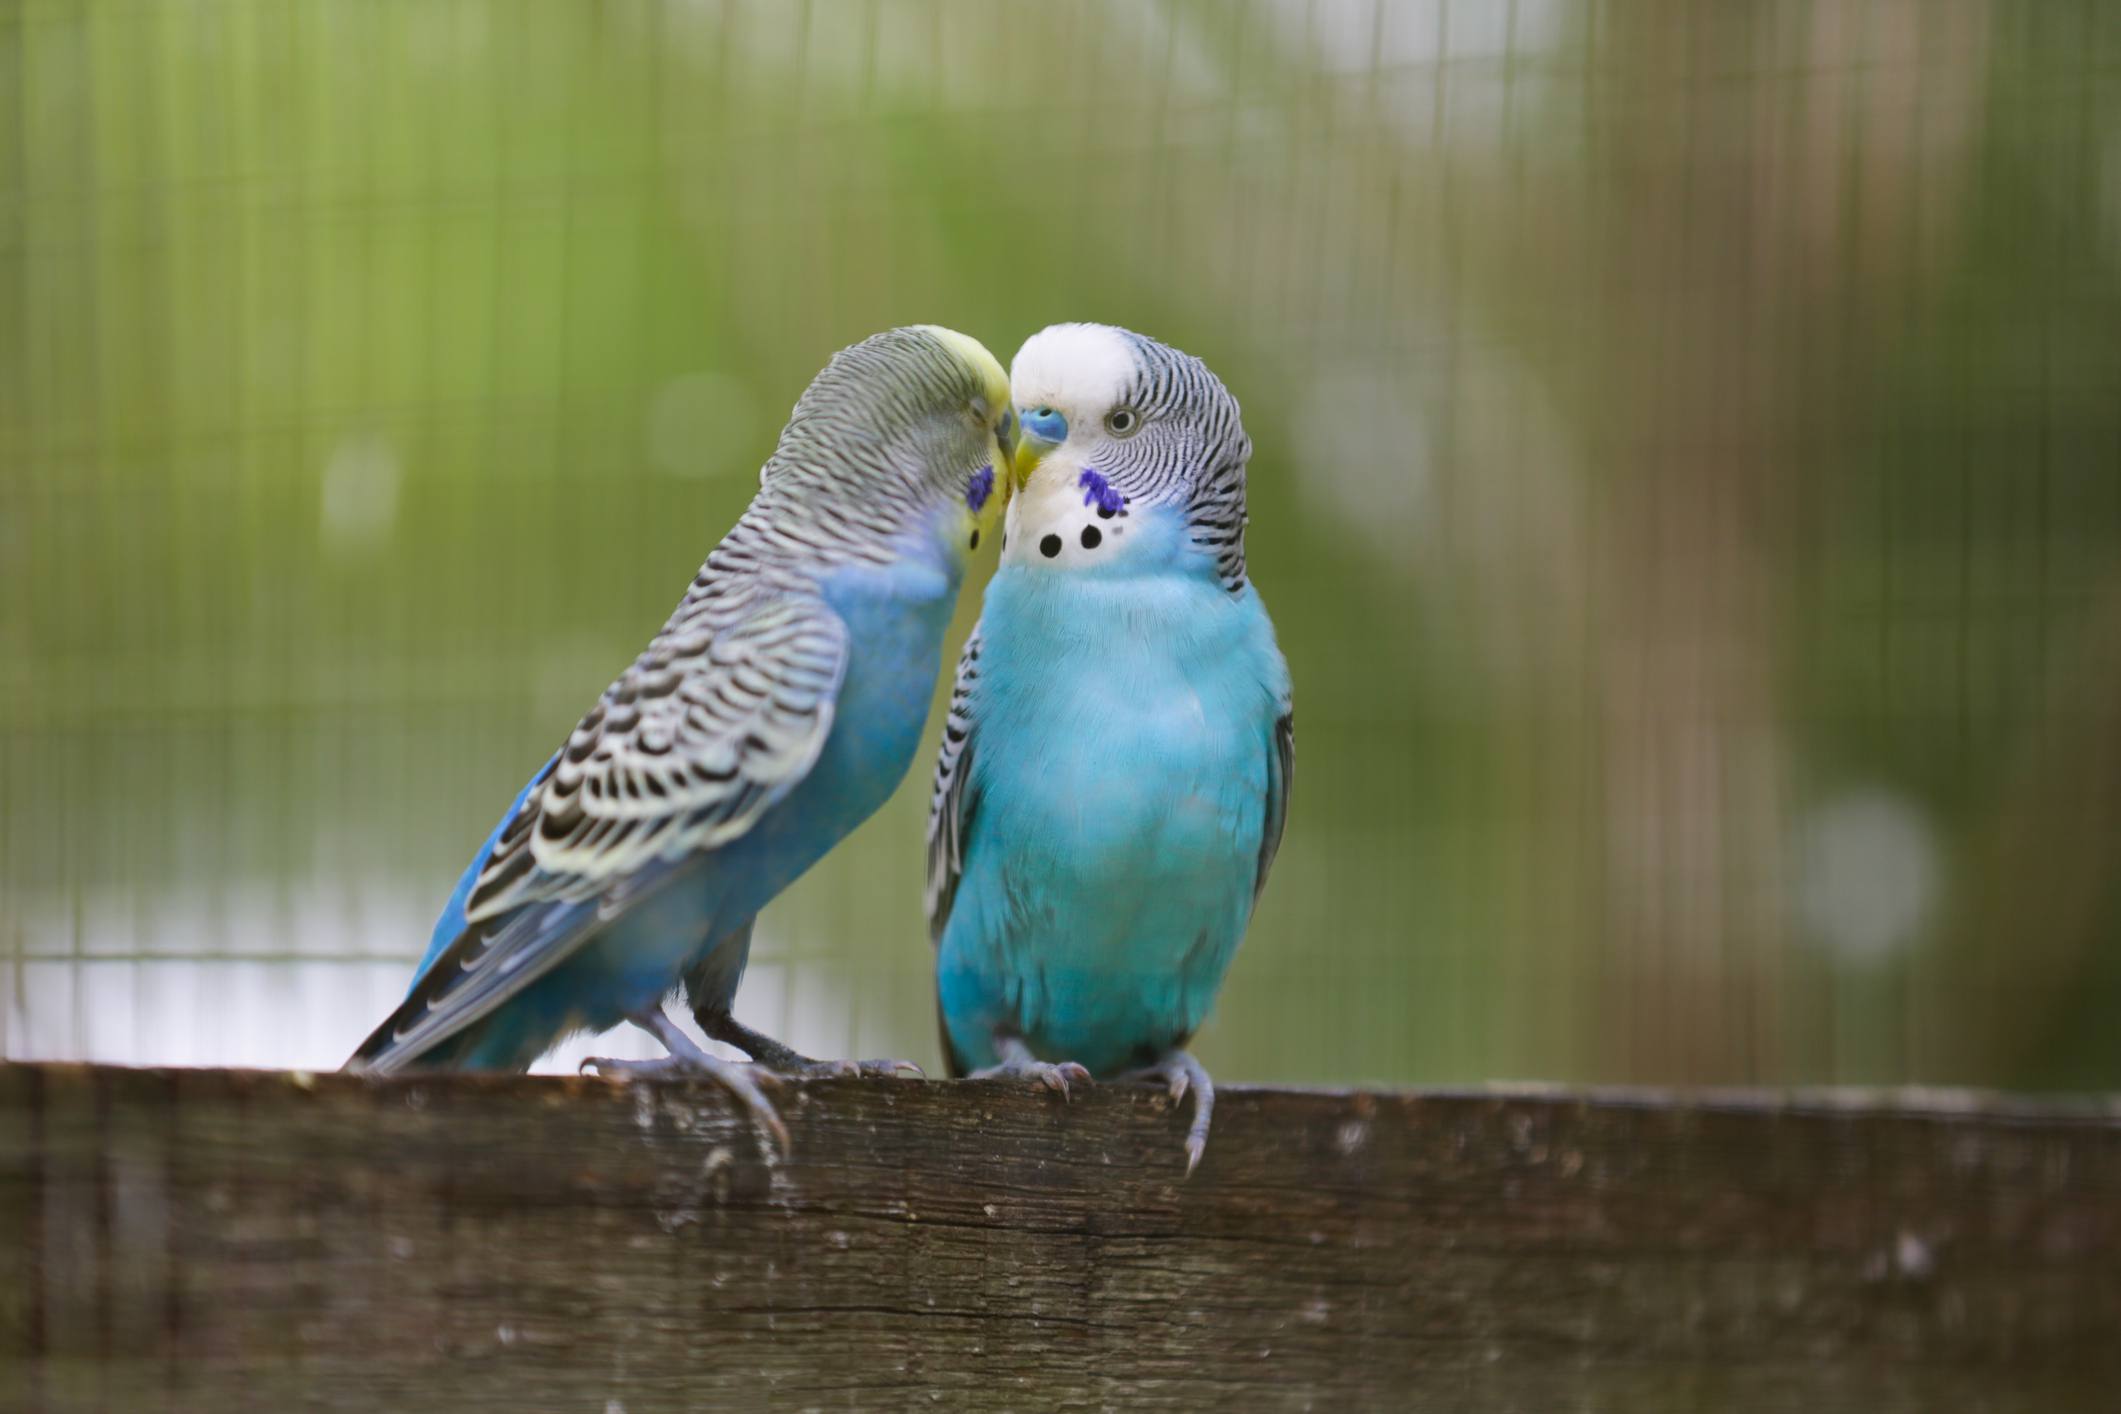 Two blue budgies on a piece of wood